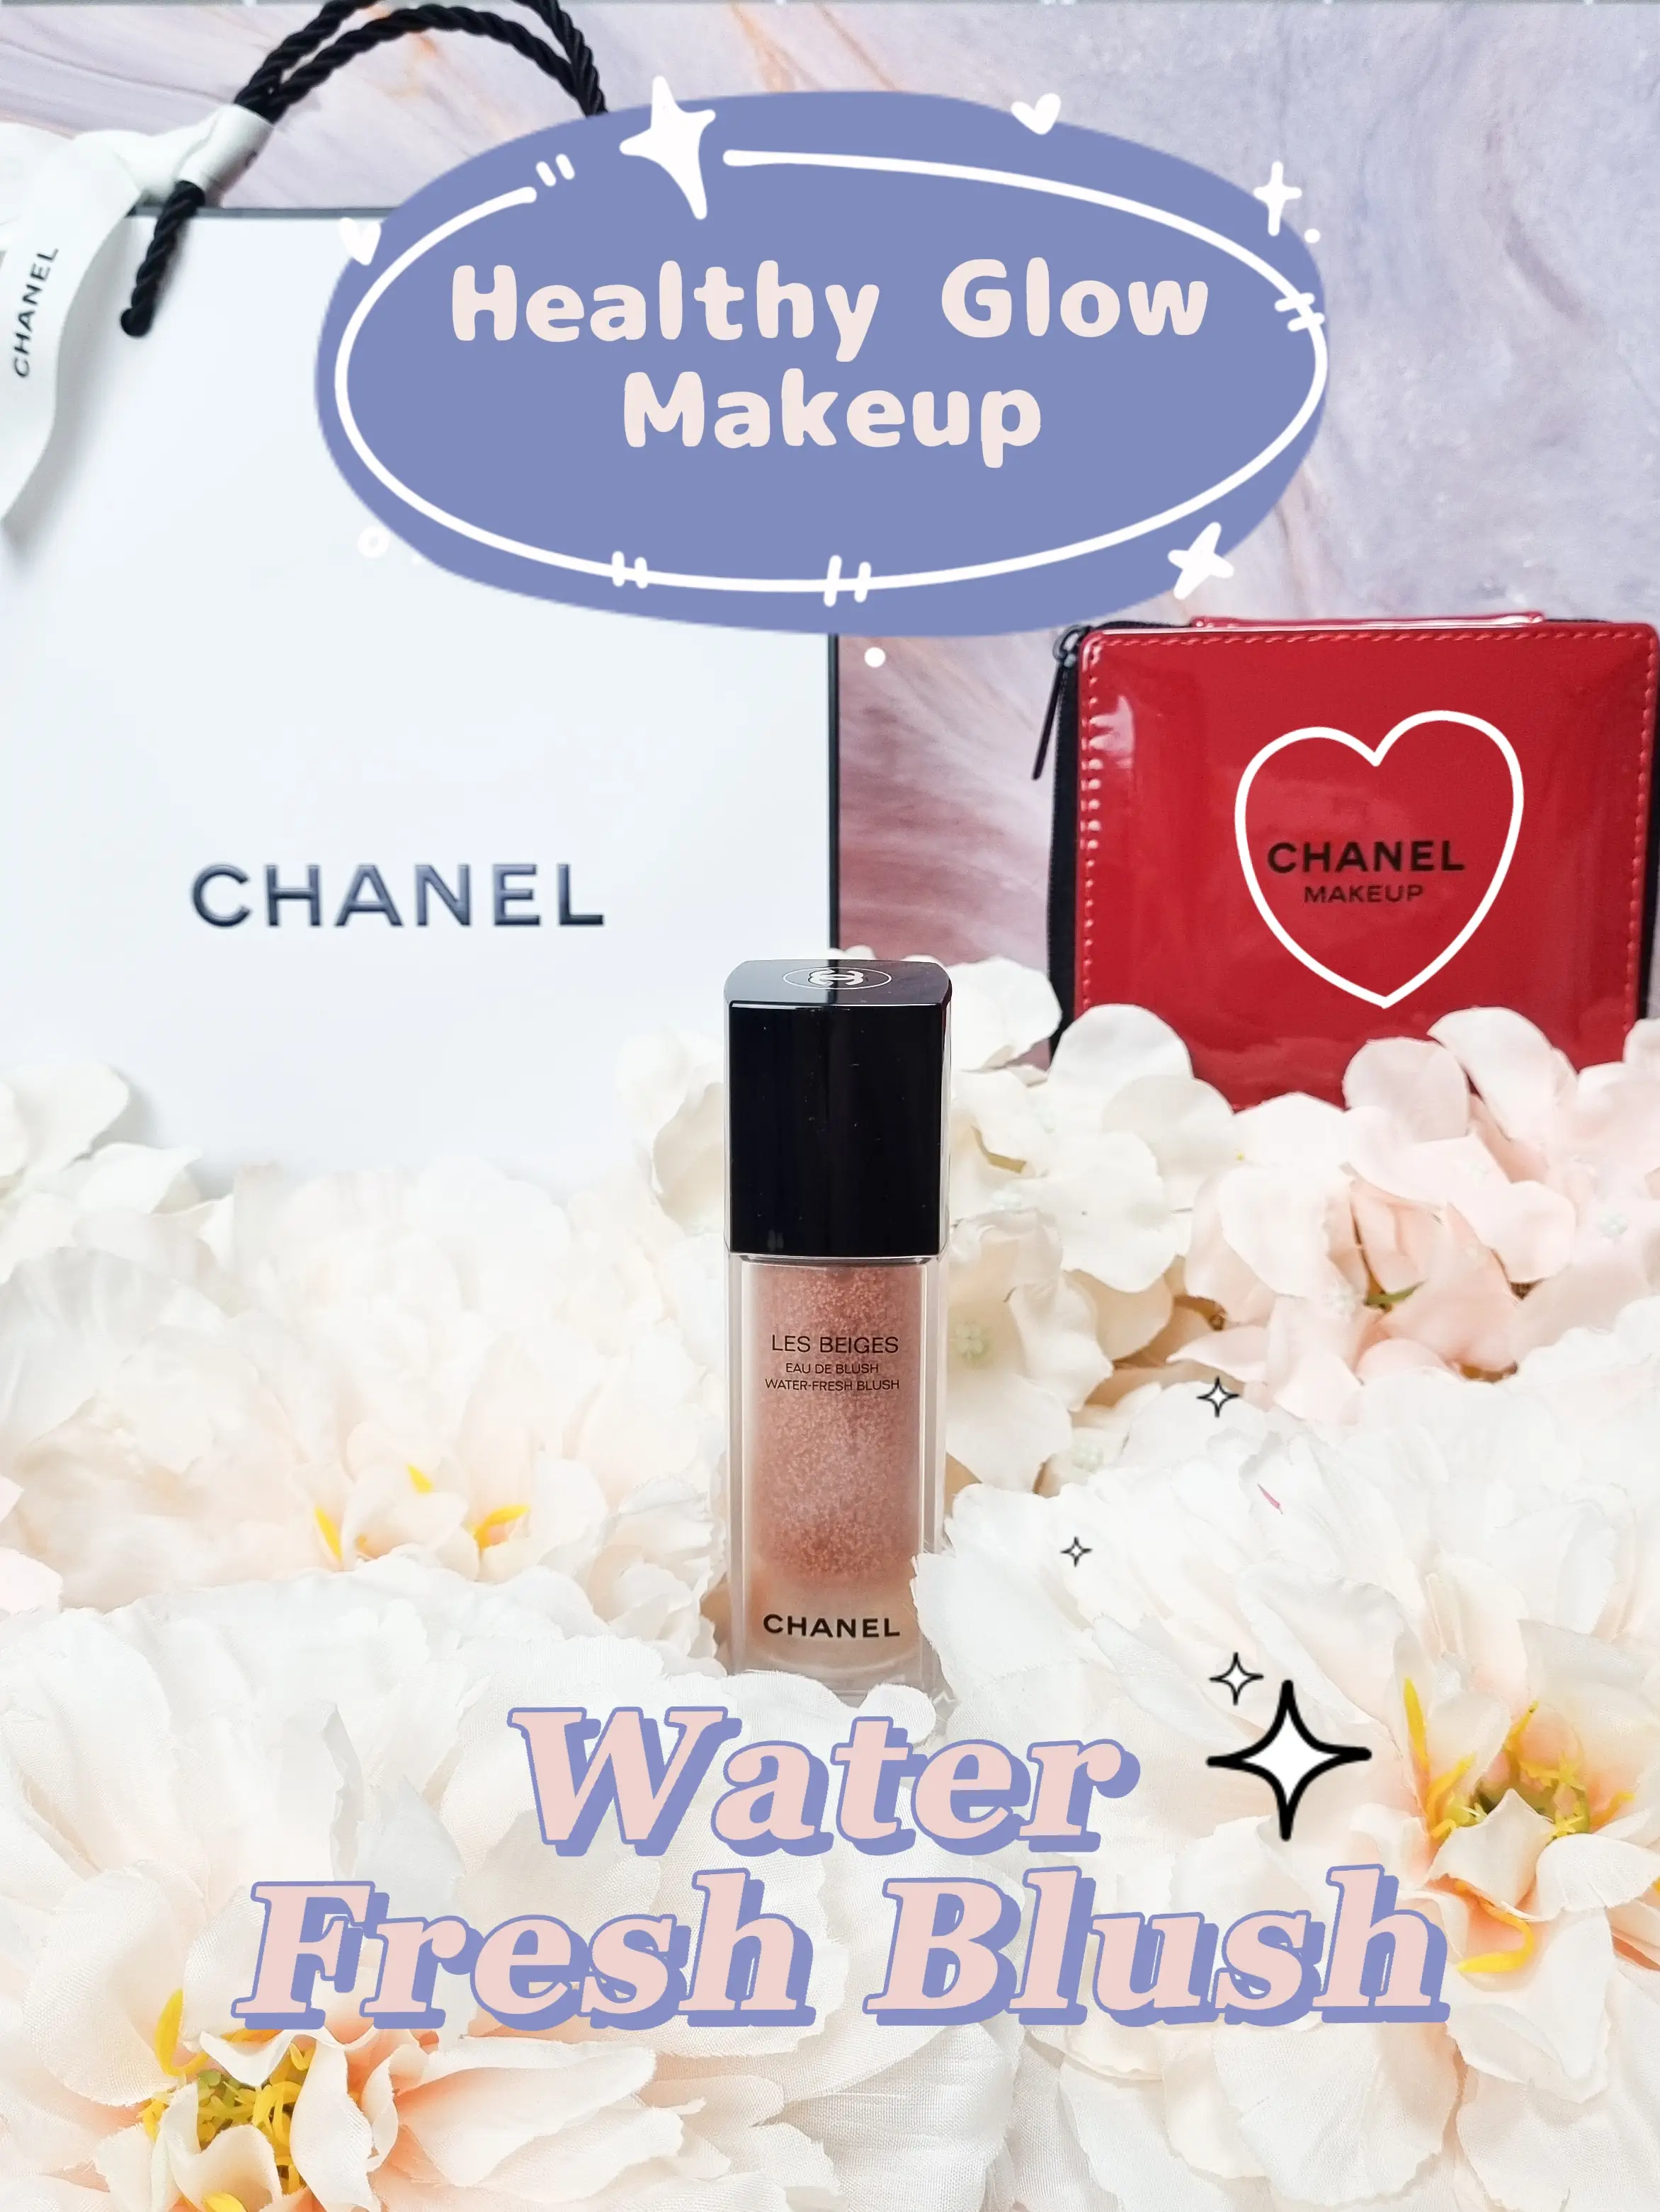 The truth about the Chanel LES BEIGES skin tint, Gallery posted by Fahira  Ornella